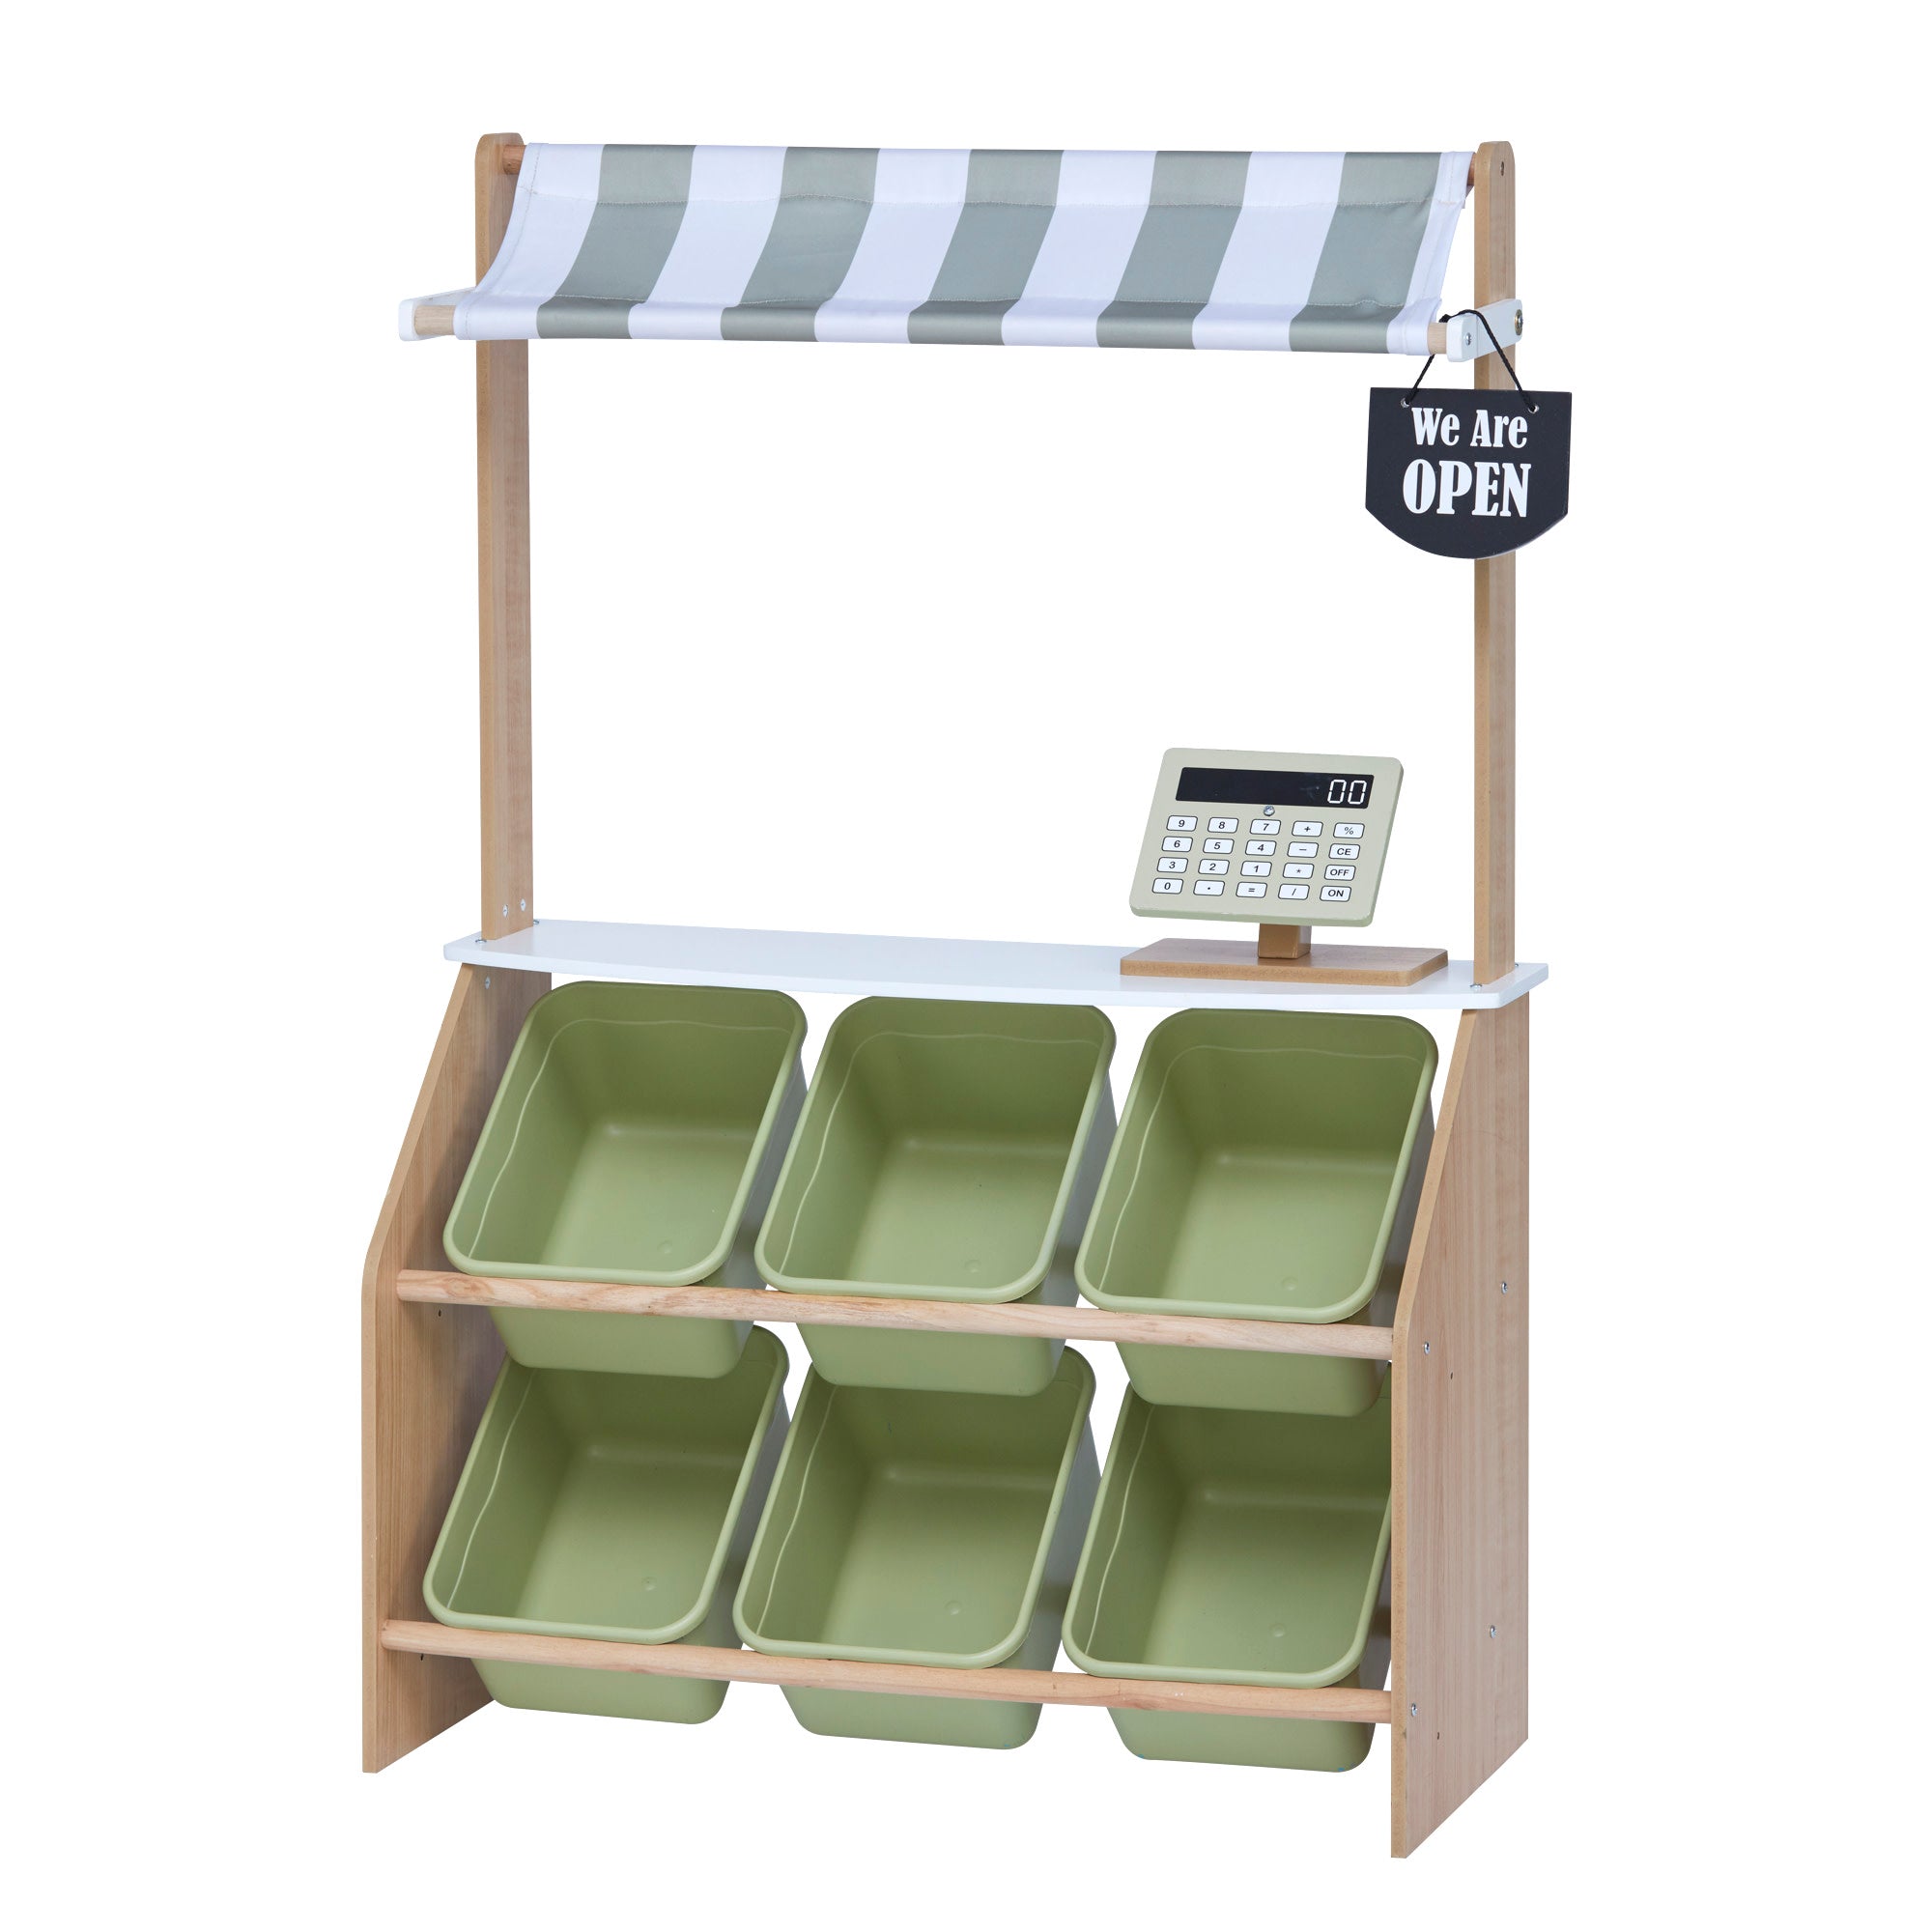 Teamson Kids Little Helper Wooden Play Farmer's Market Stand with Cash Register and Storage Bins, Natural/Green